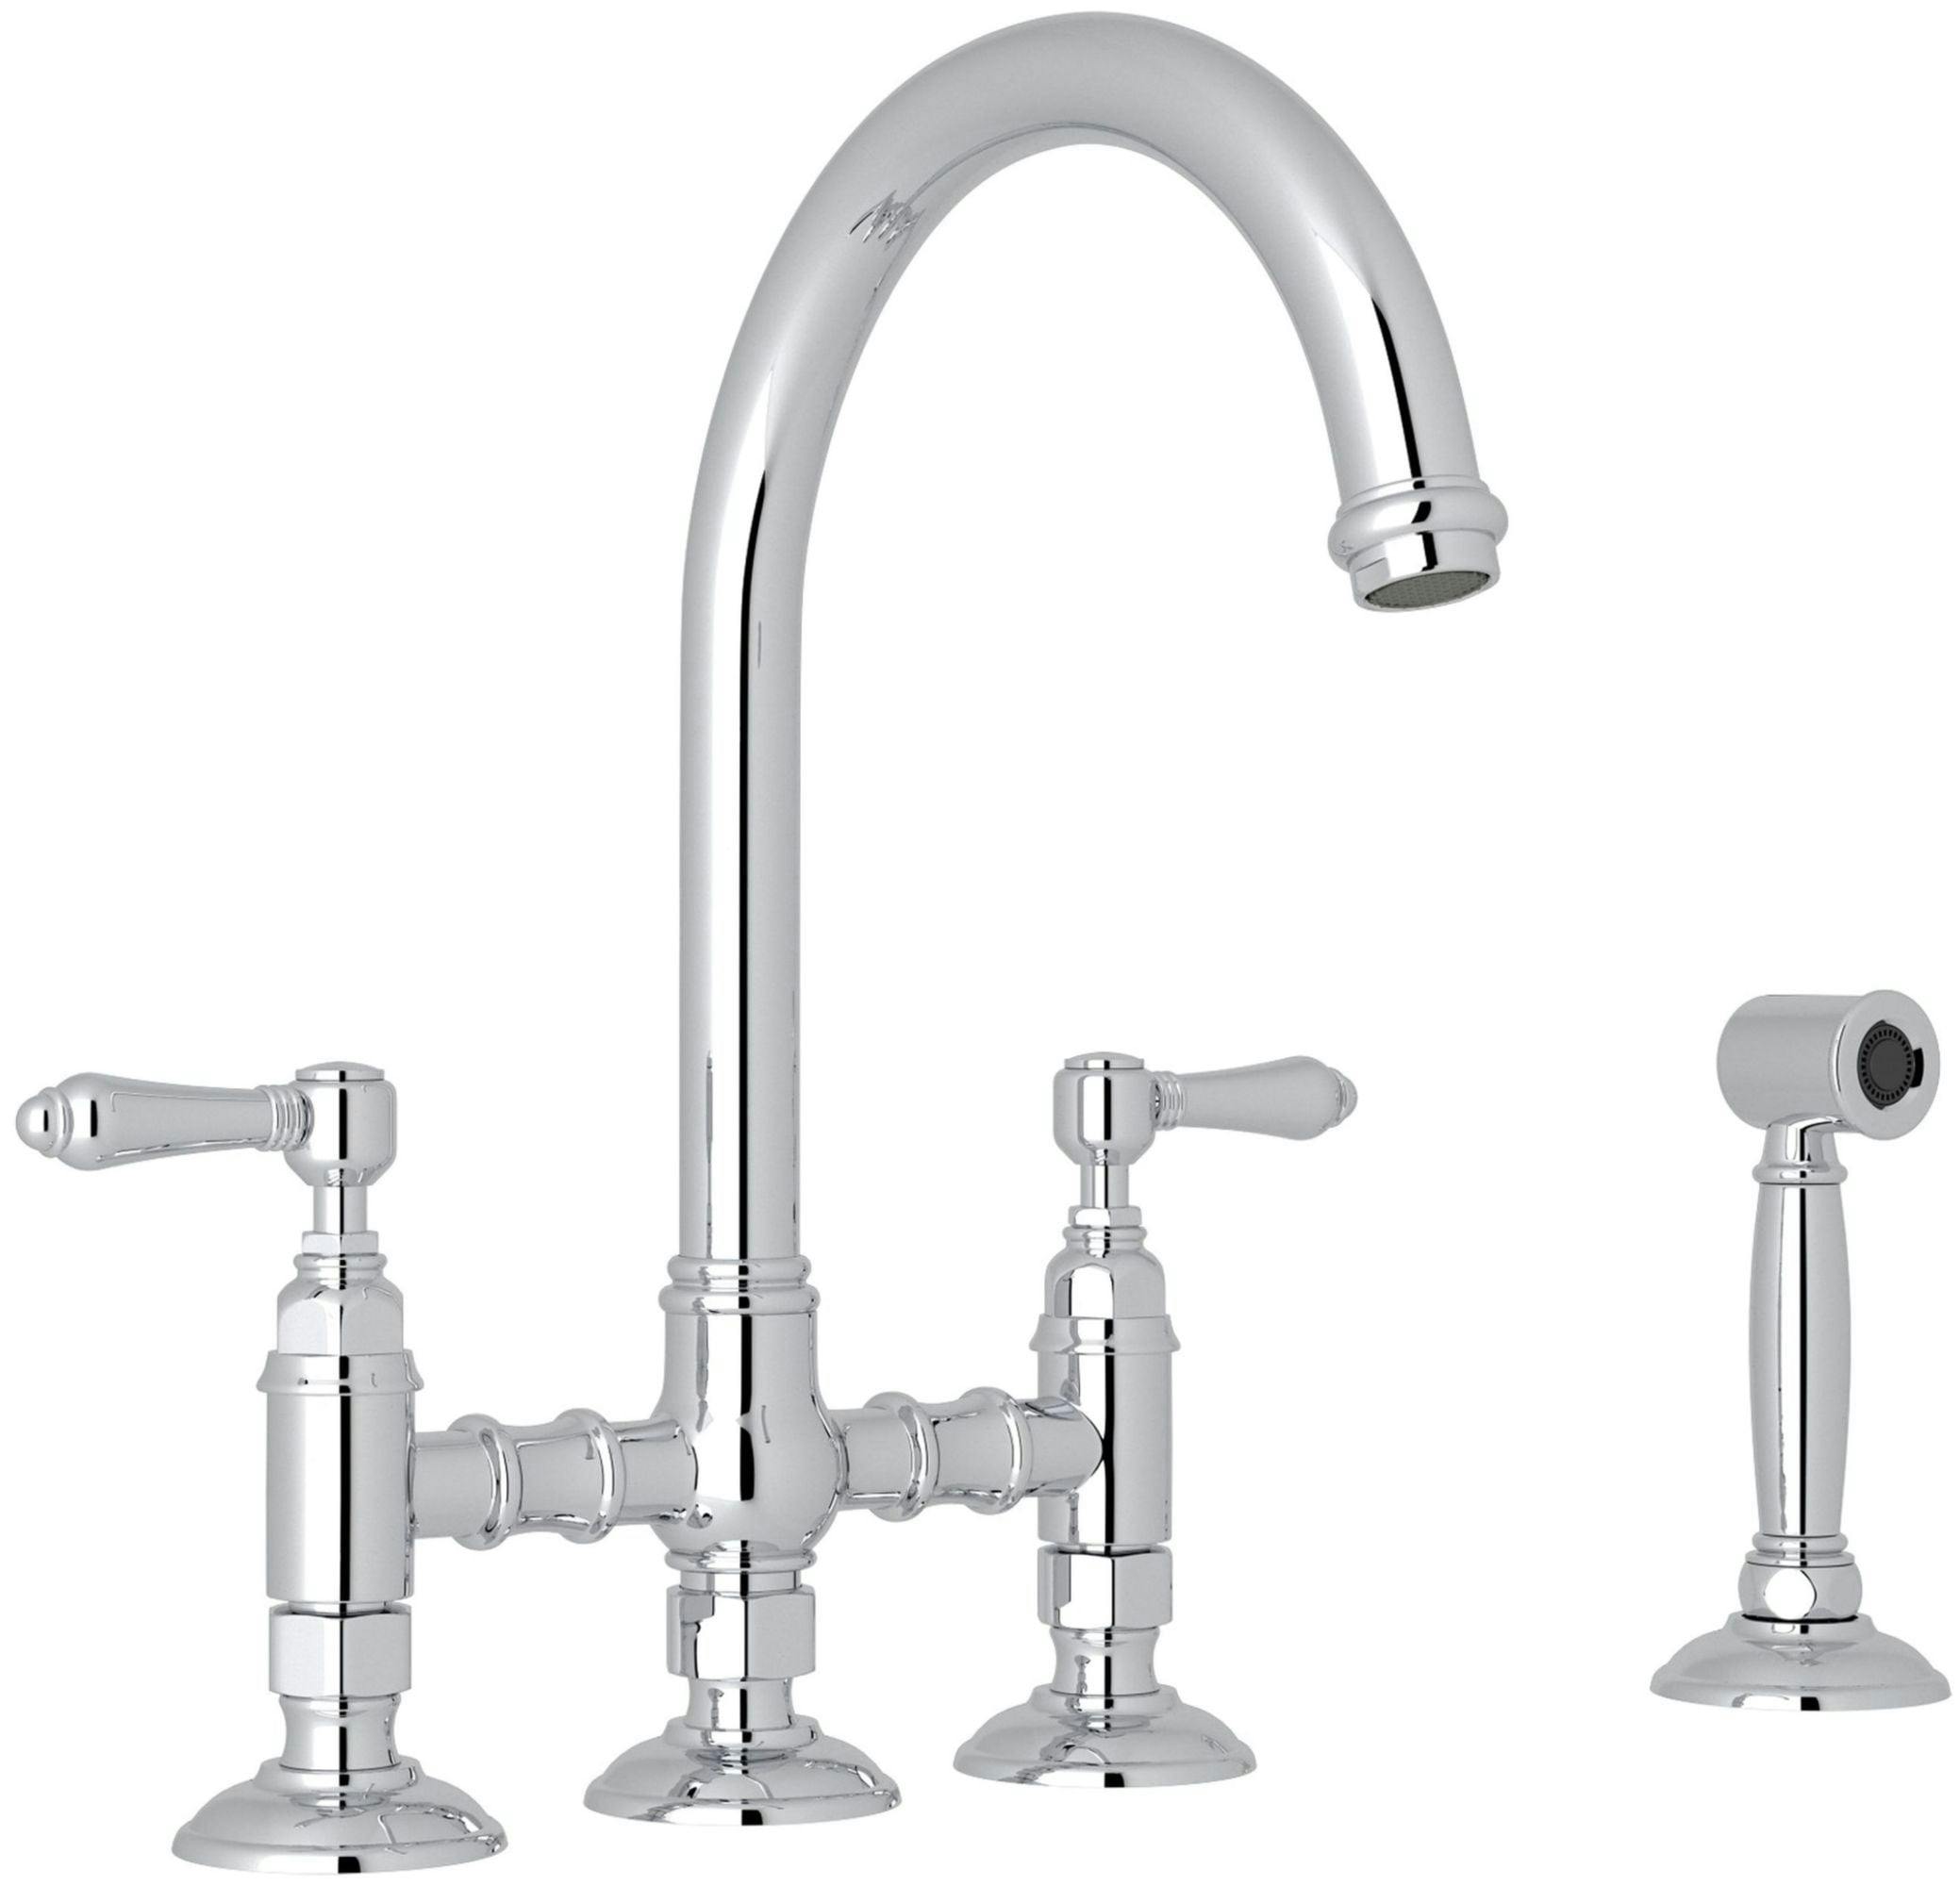 Classic Polished Nickel Kitchen Faucet with Sidespray and Dual Handles